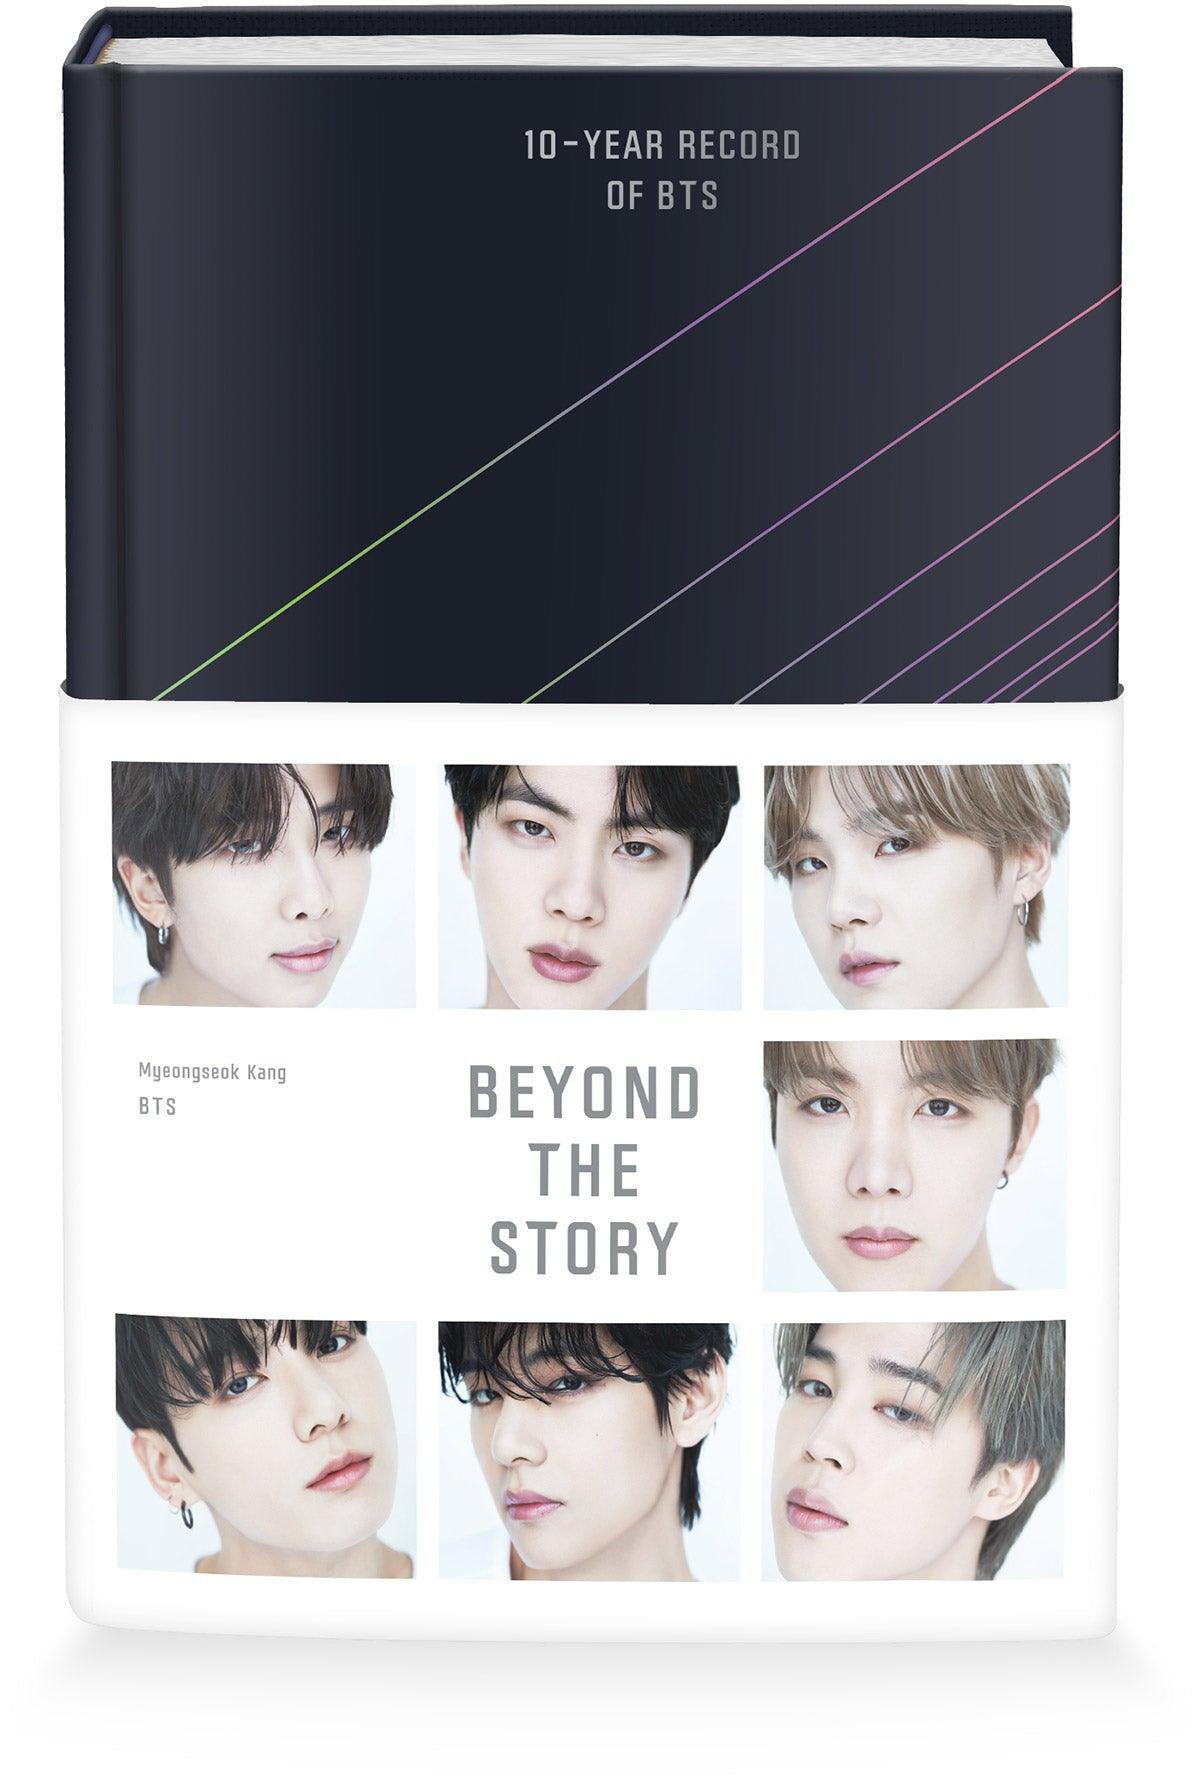 Beyond the Story: 10-Year Record of BTS (ENGLISH) - K-POP WORLD (7396347183239)